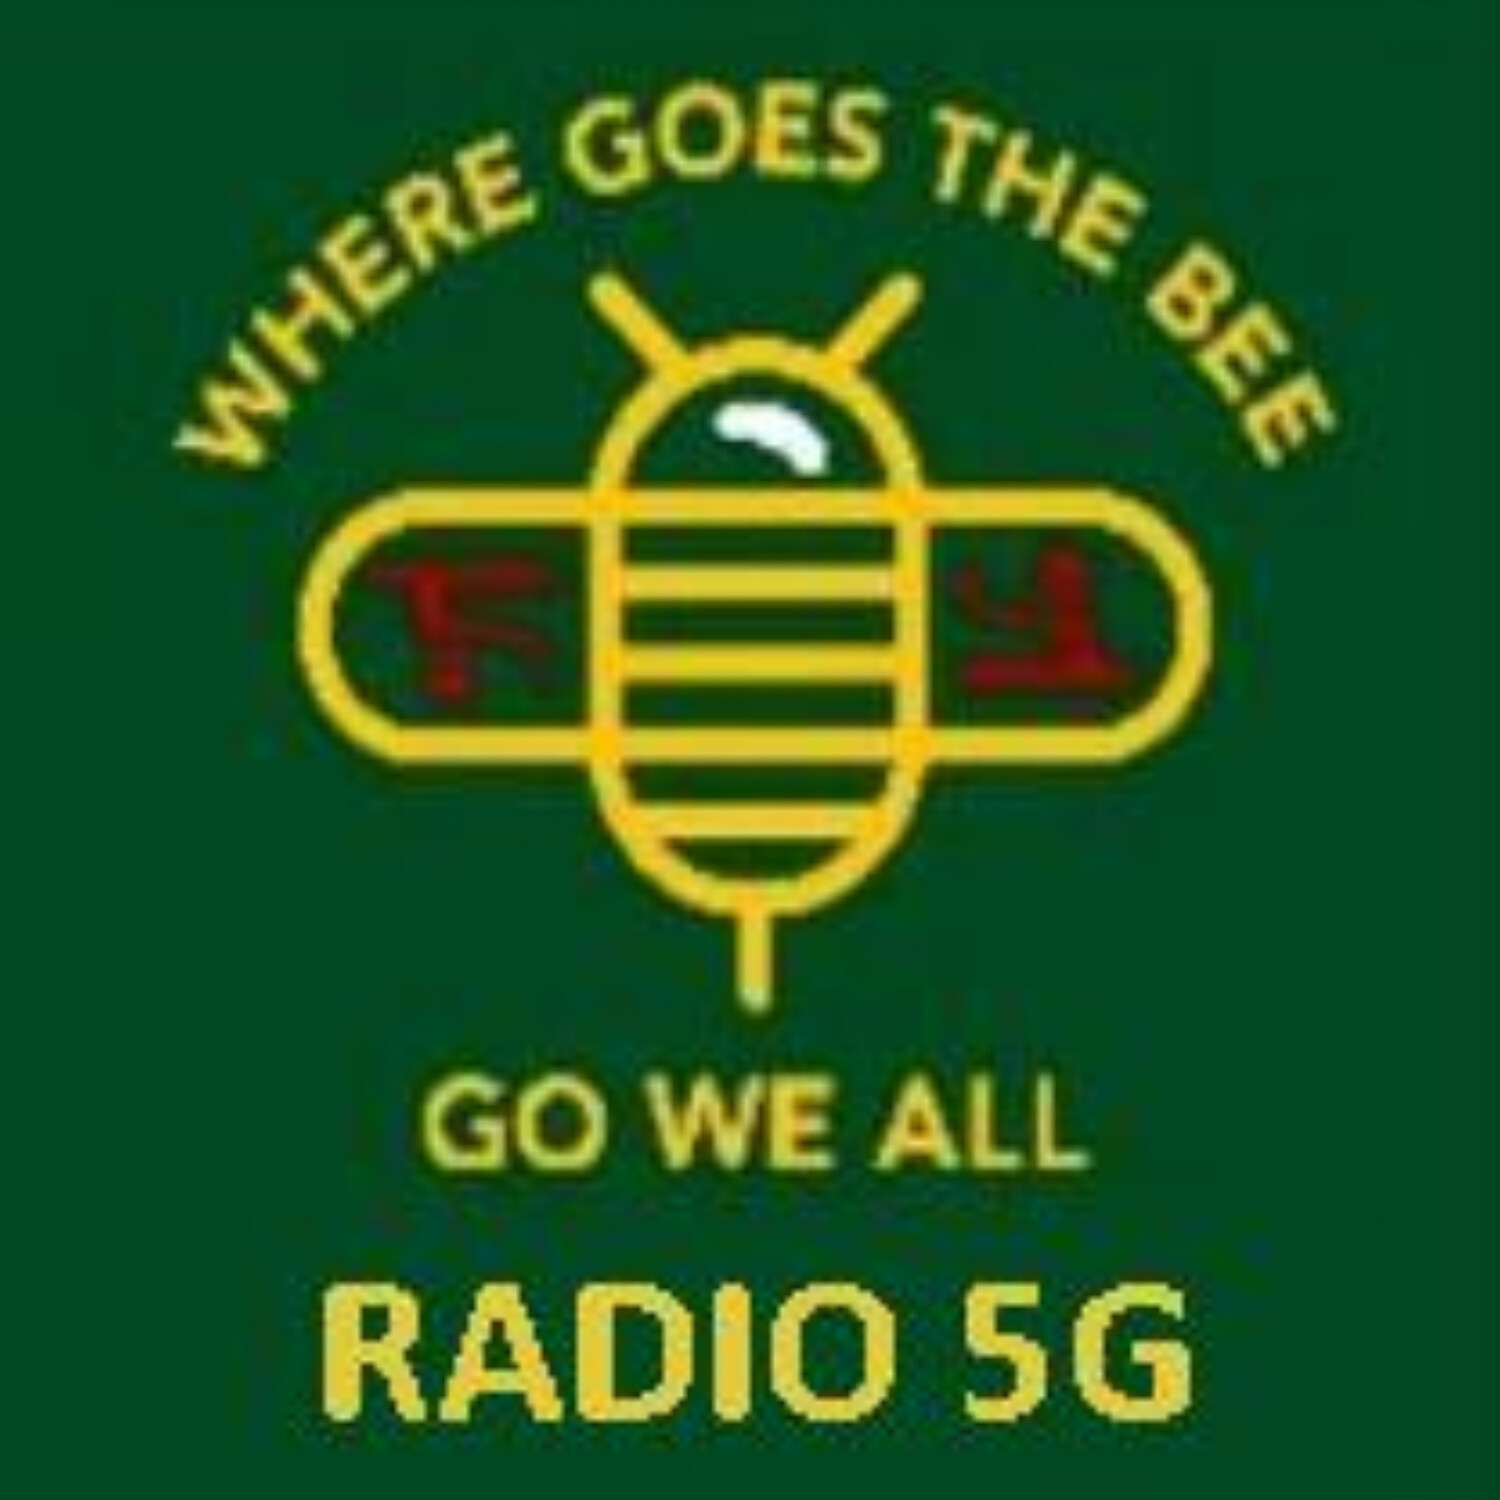 “RADIO 5G” 1/26/22 - Stew Peters on Military Vax , Hospitals Paid to Kill, Vax Victims Overflow Morgues